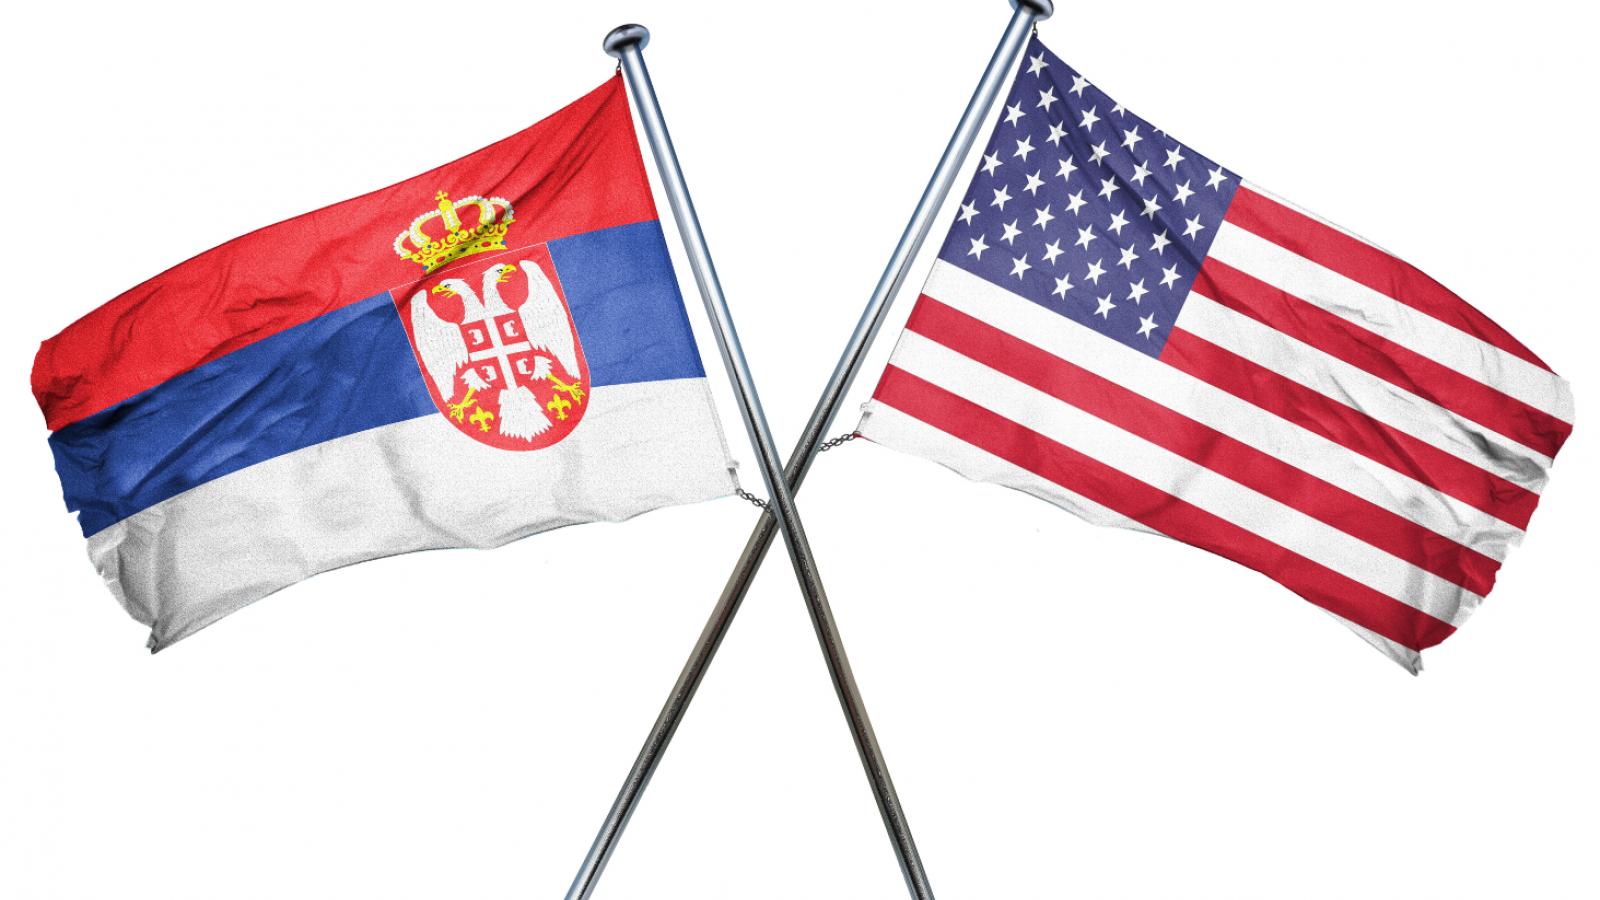 Serbian and U.S. flags crossed over each other